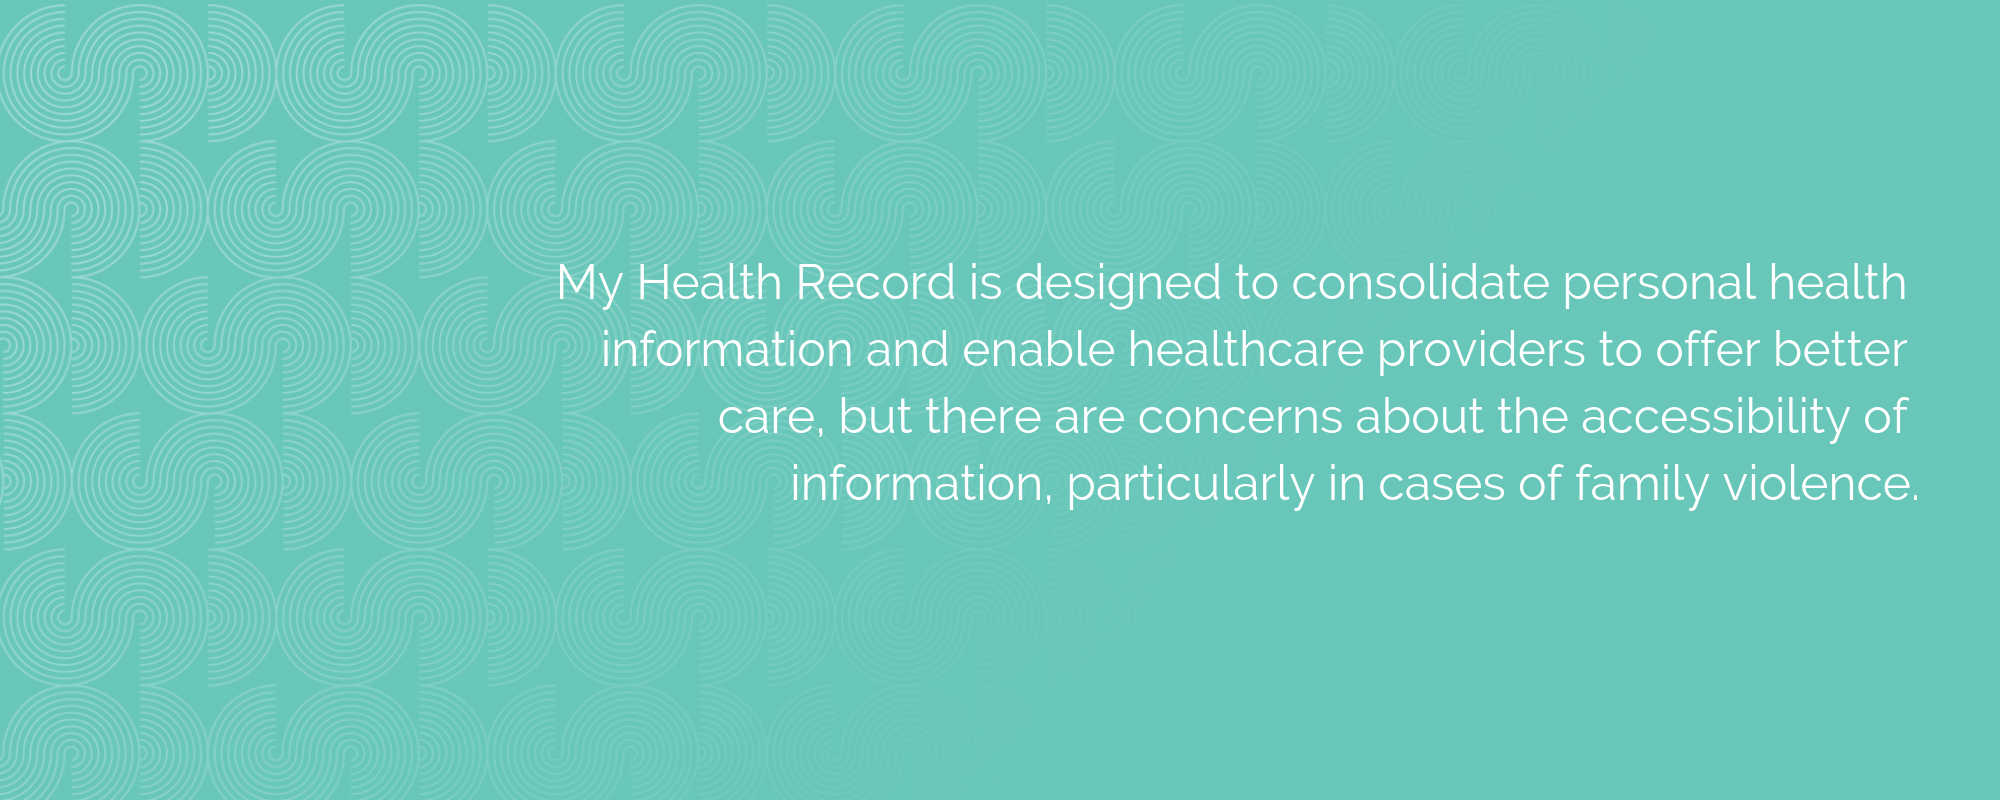 Image with text "My Health Record is designed to consolidate personal health information and enable healthcare providers to offer better care, but there are concerns about the accessibility of information, particularly in cases of family violence."